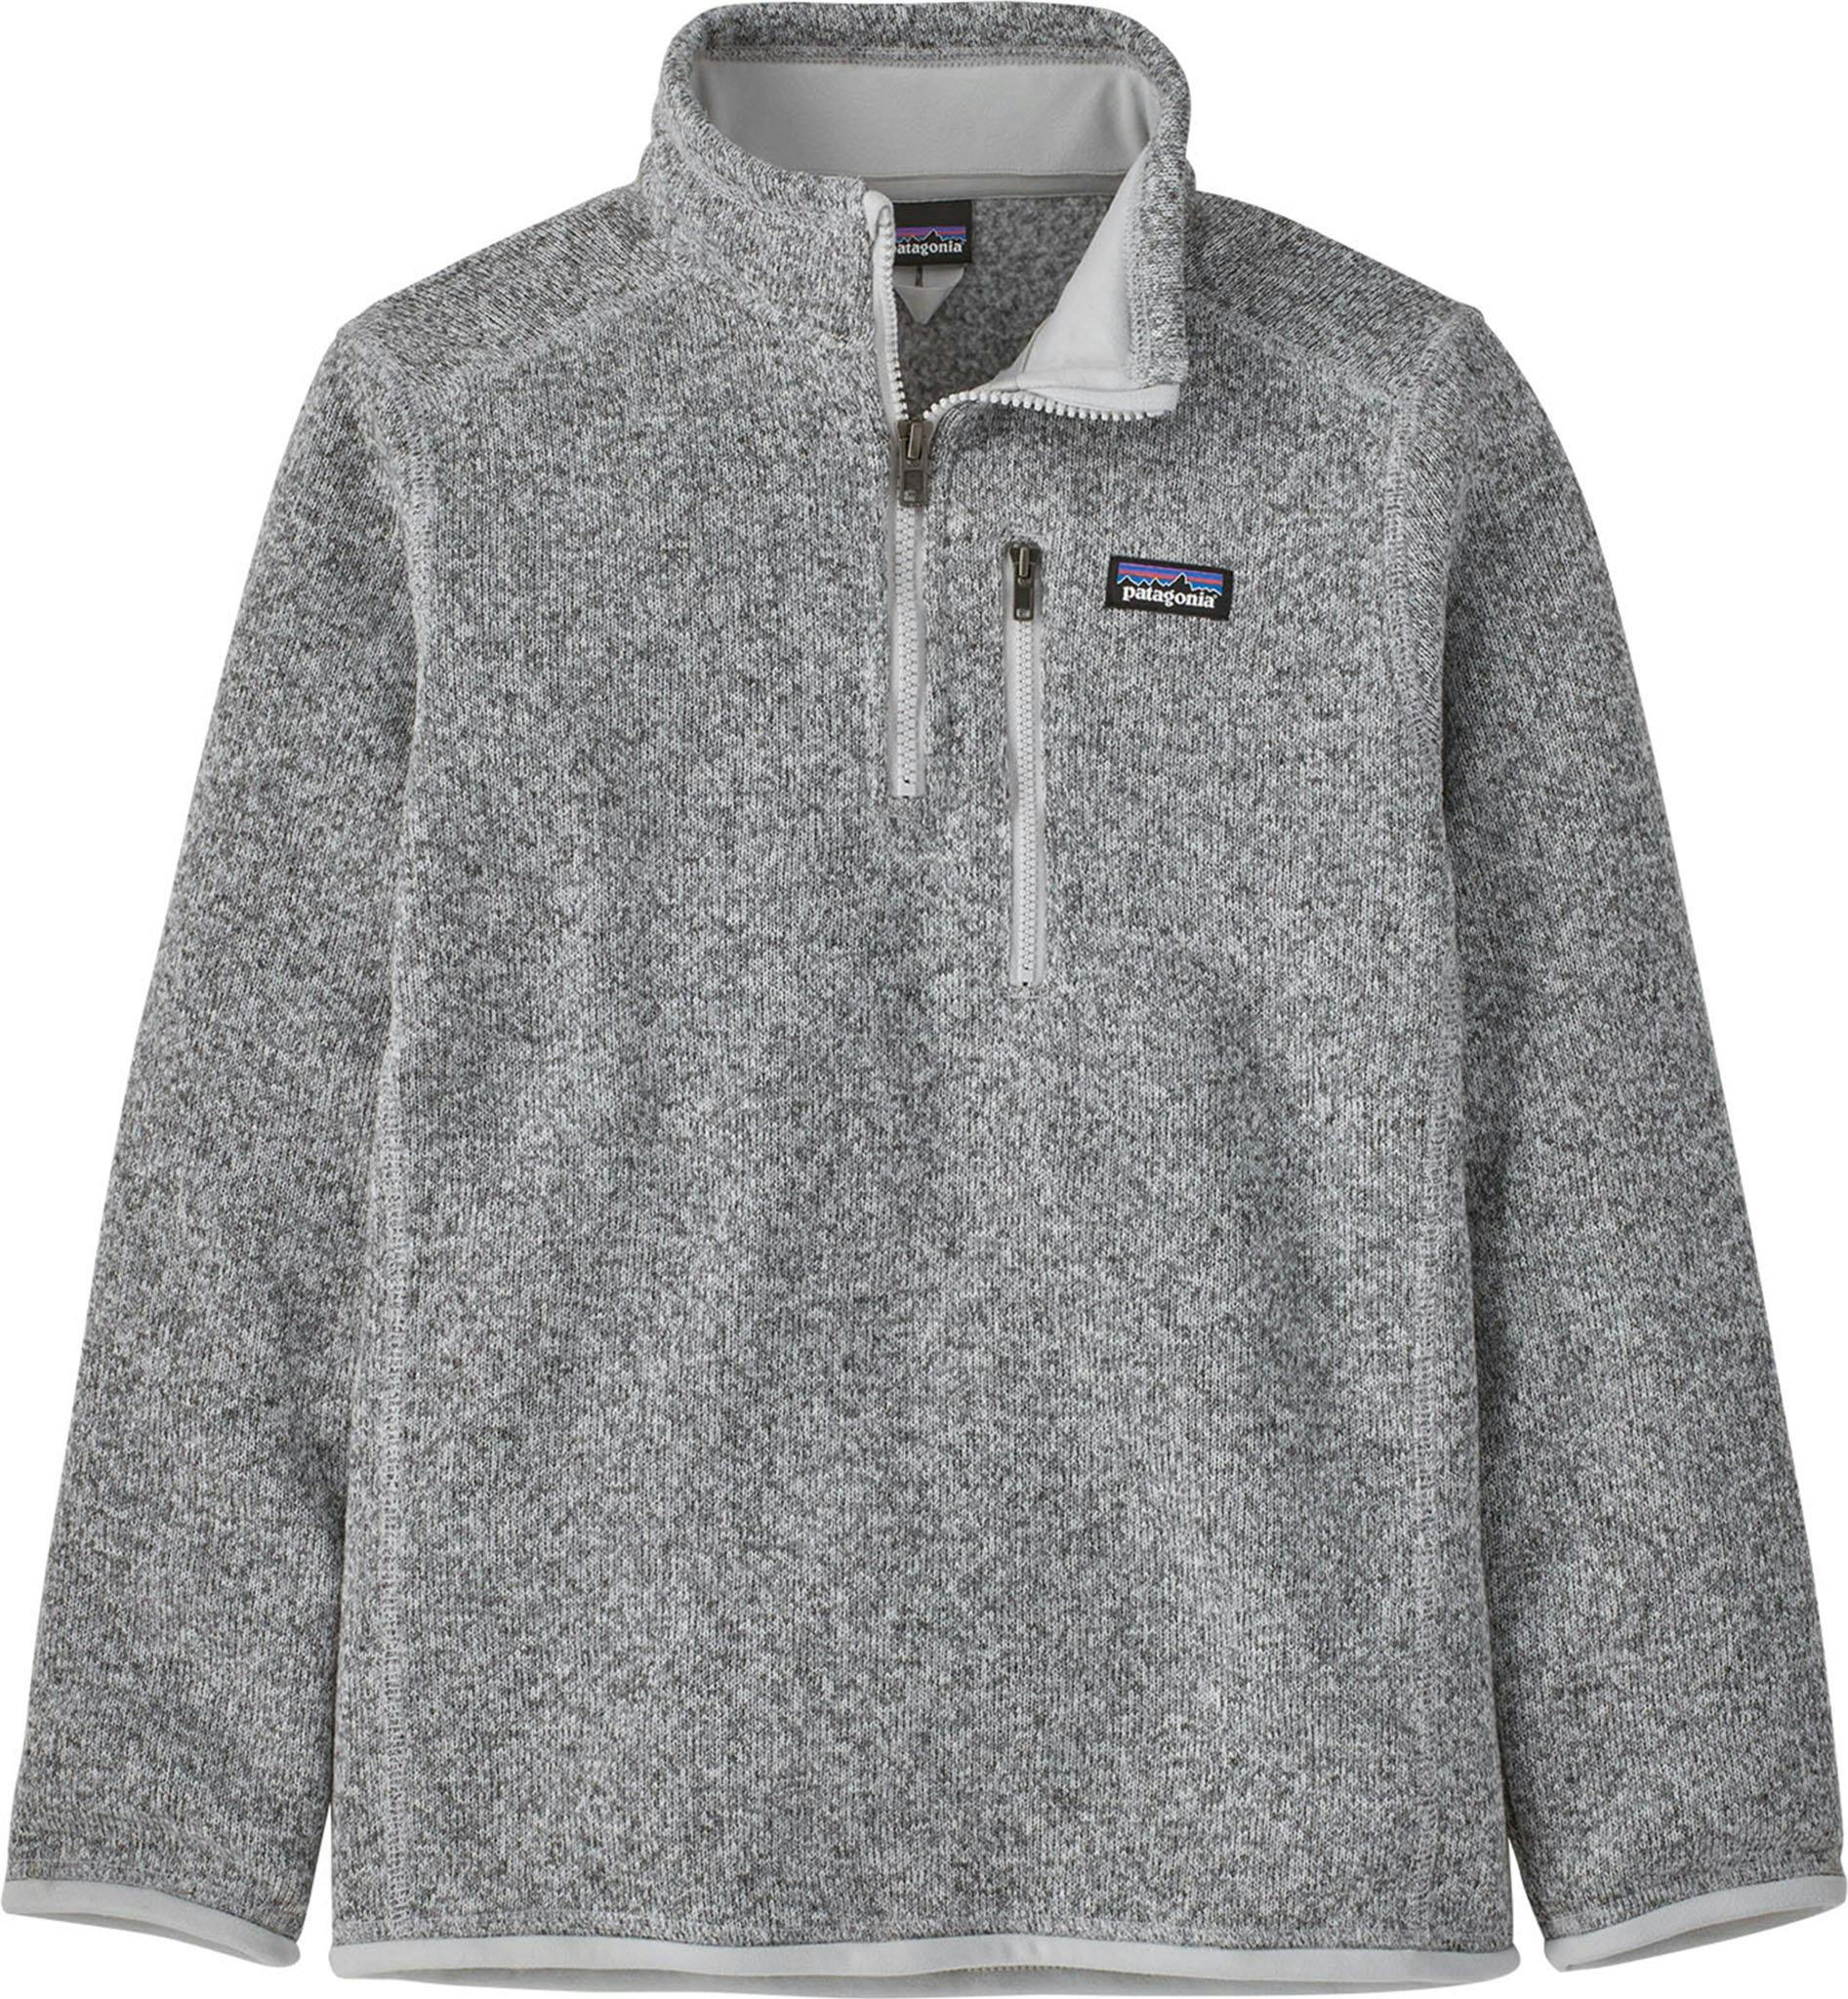 Product image for Better Sweater 1/4 Zip - Kid's